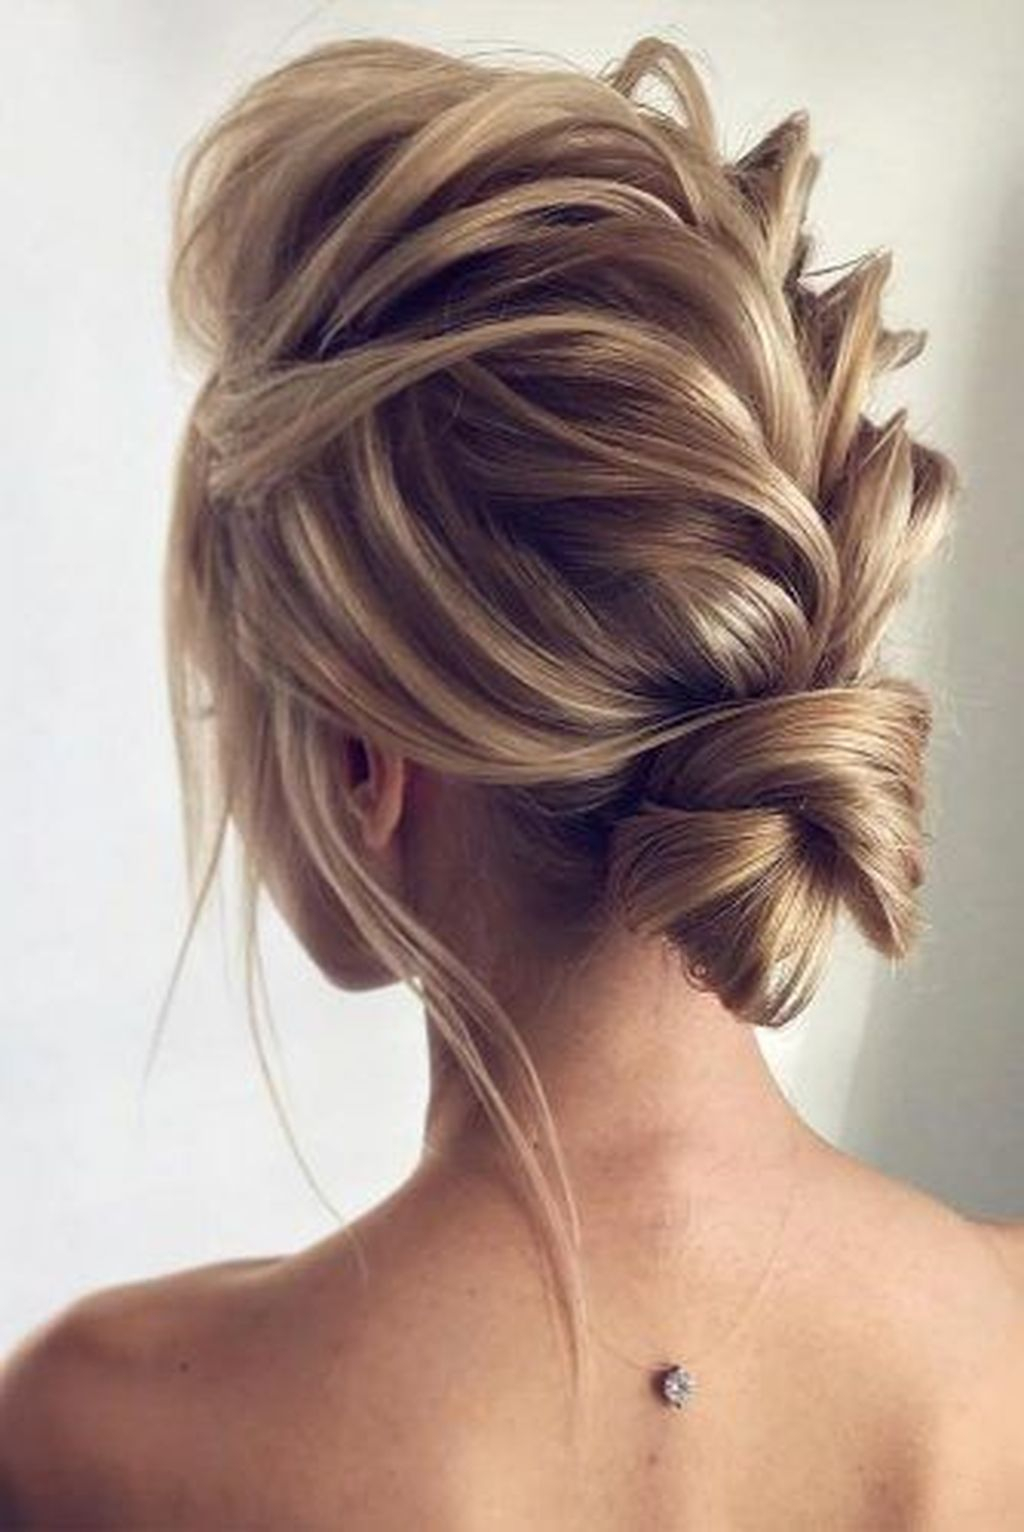 Hairstyle Ideas For Perfect Look On Winter Holidays